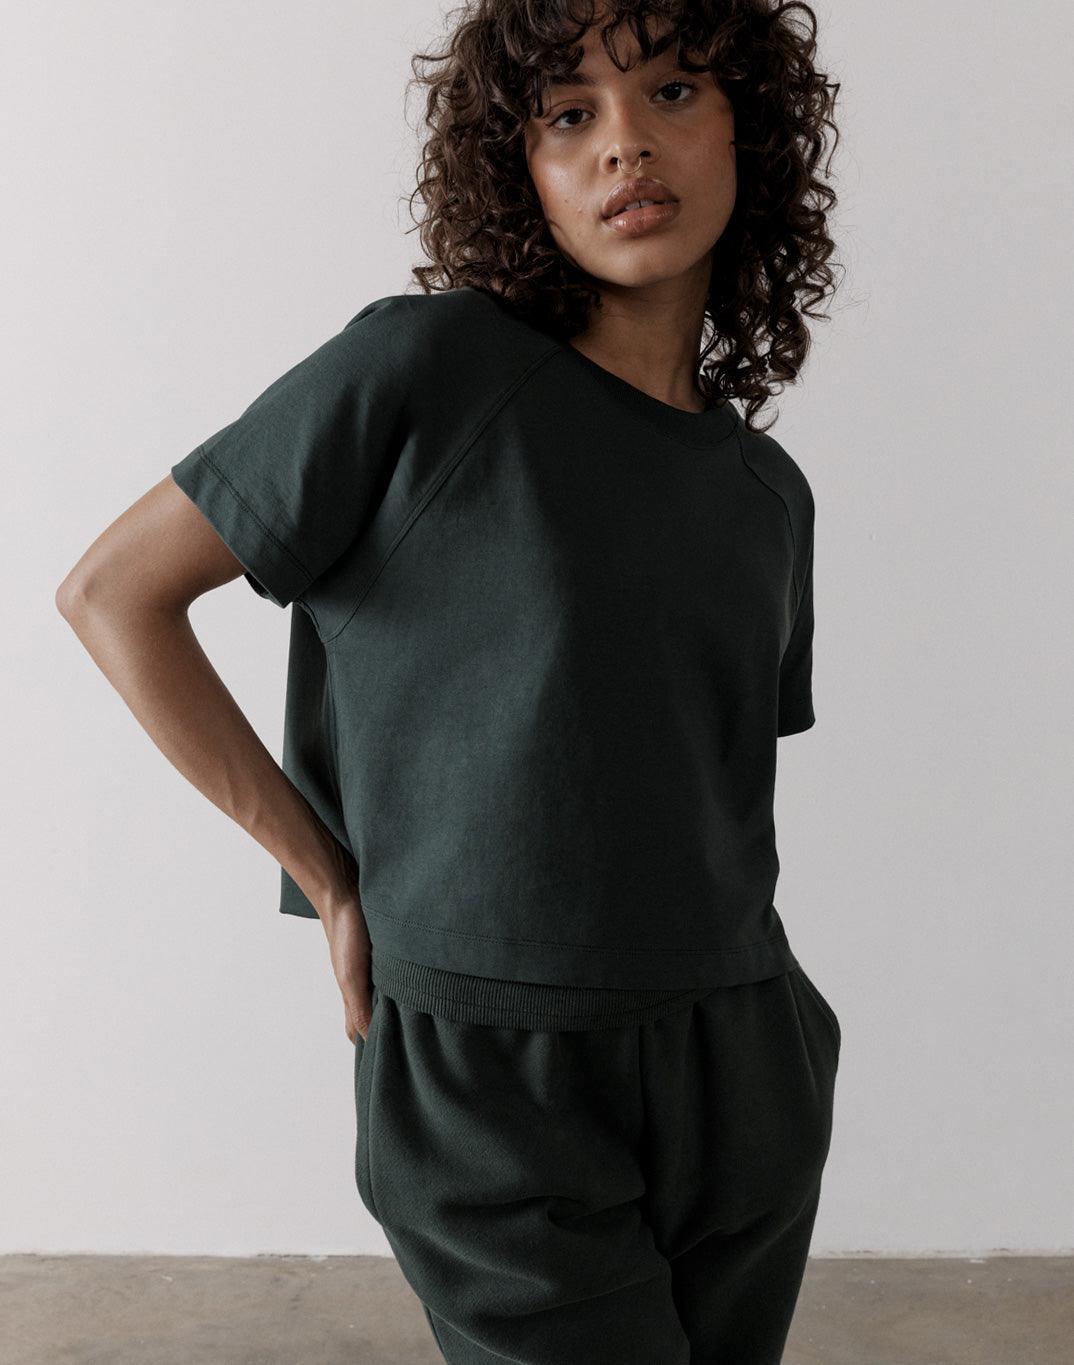 The Women's Crop Tee in Earth Green - T-Shirts - Windsorbauders IE